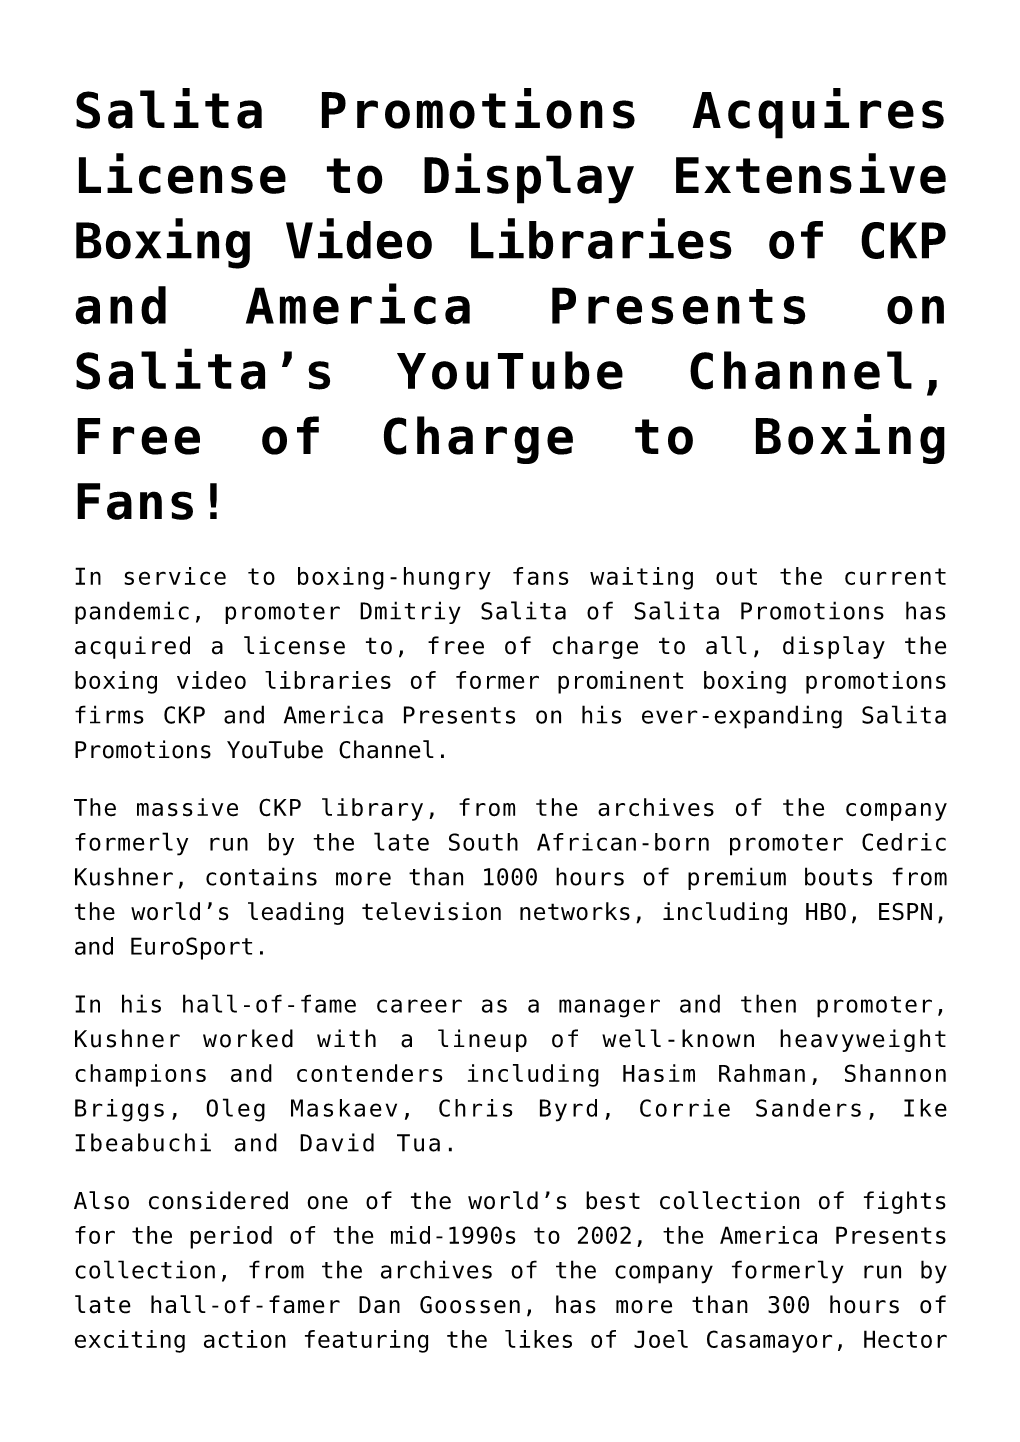 Salita Promotions Acquires License to Display Extensive Boxing Video Libraries of CKP and America Presents on Salita’S Youtube Channel, Free of Charge to Boxing Fans!